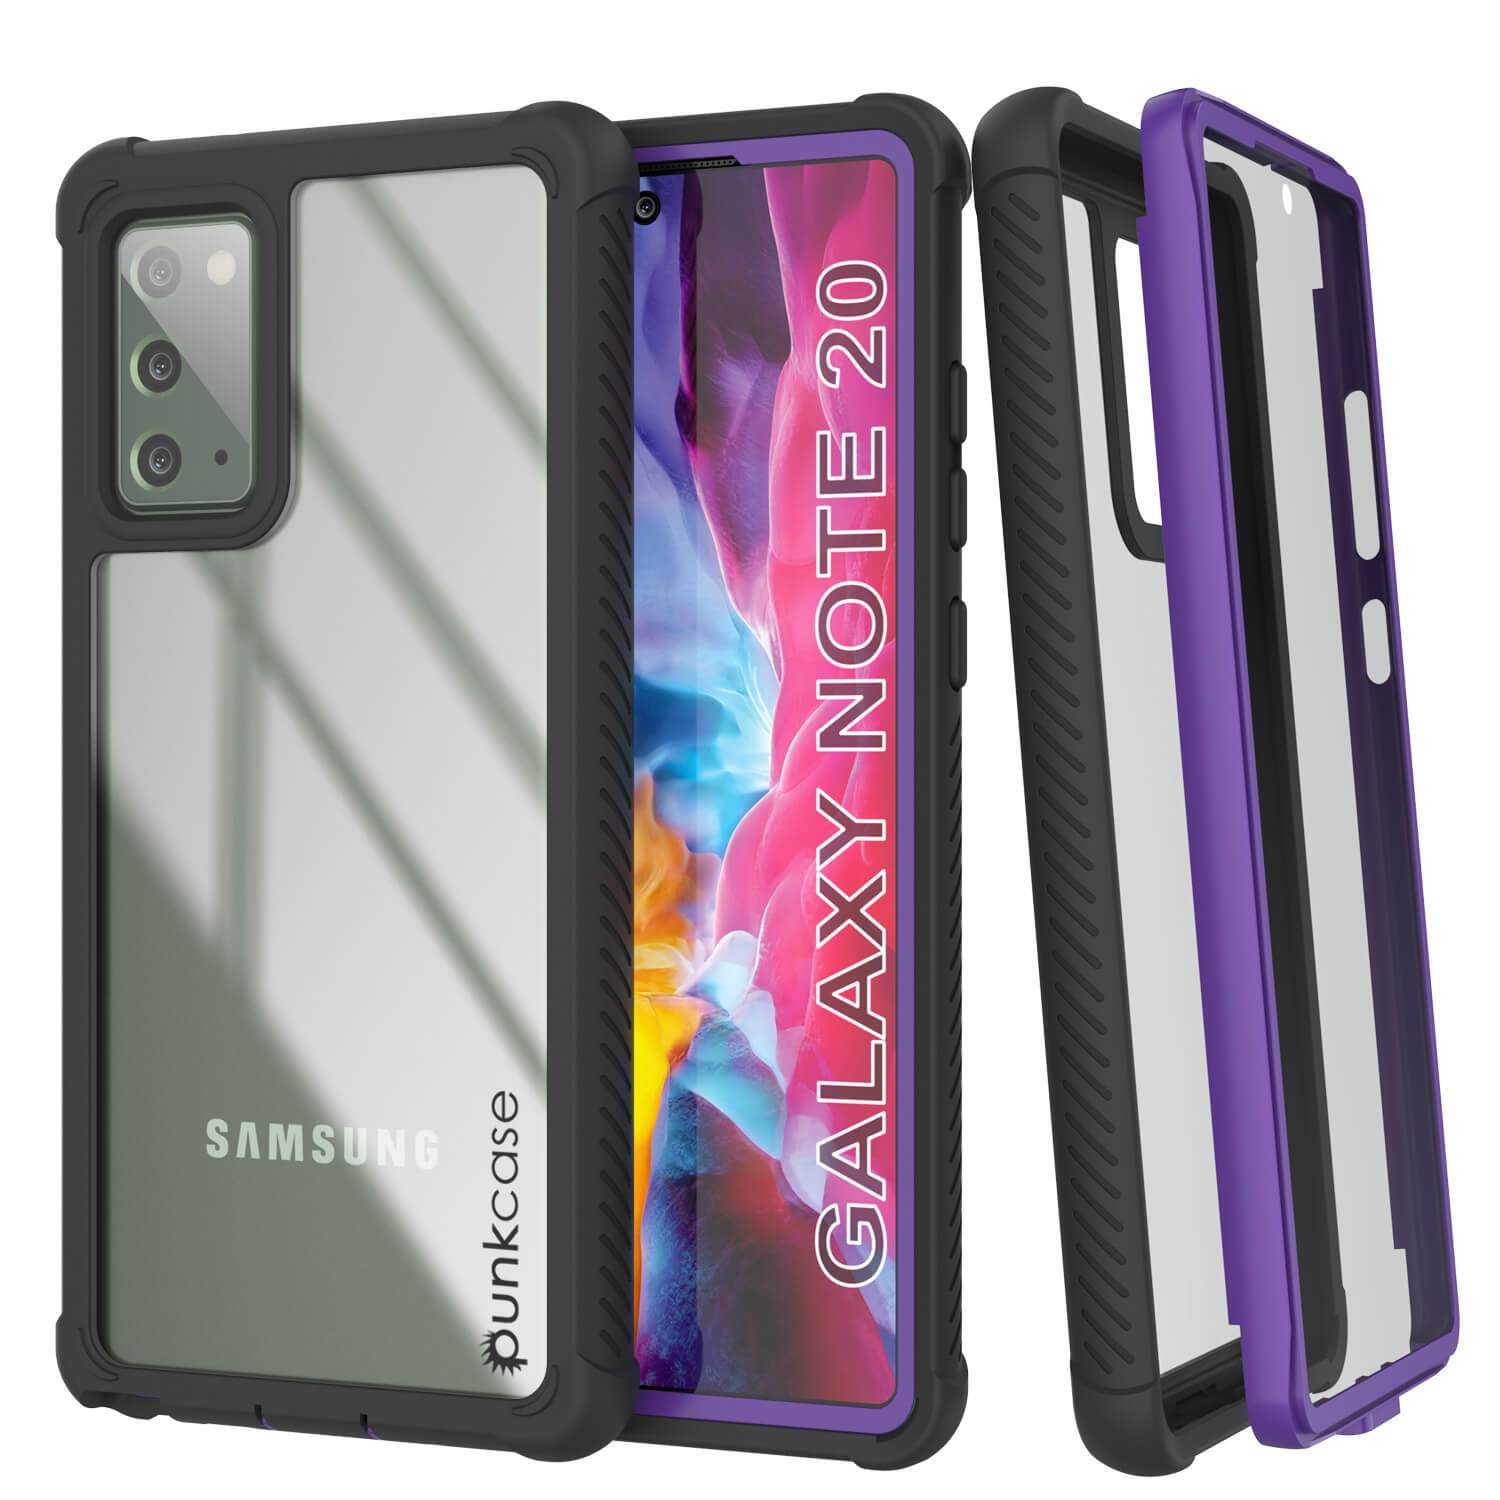 Punkcase Galaxy Note 20 Case, [Spartan Series] Purple Rugged Heavy Duty Cover W/Built in Screen Protector